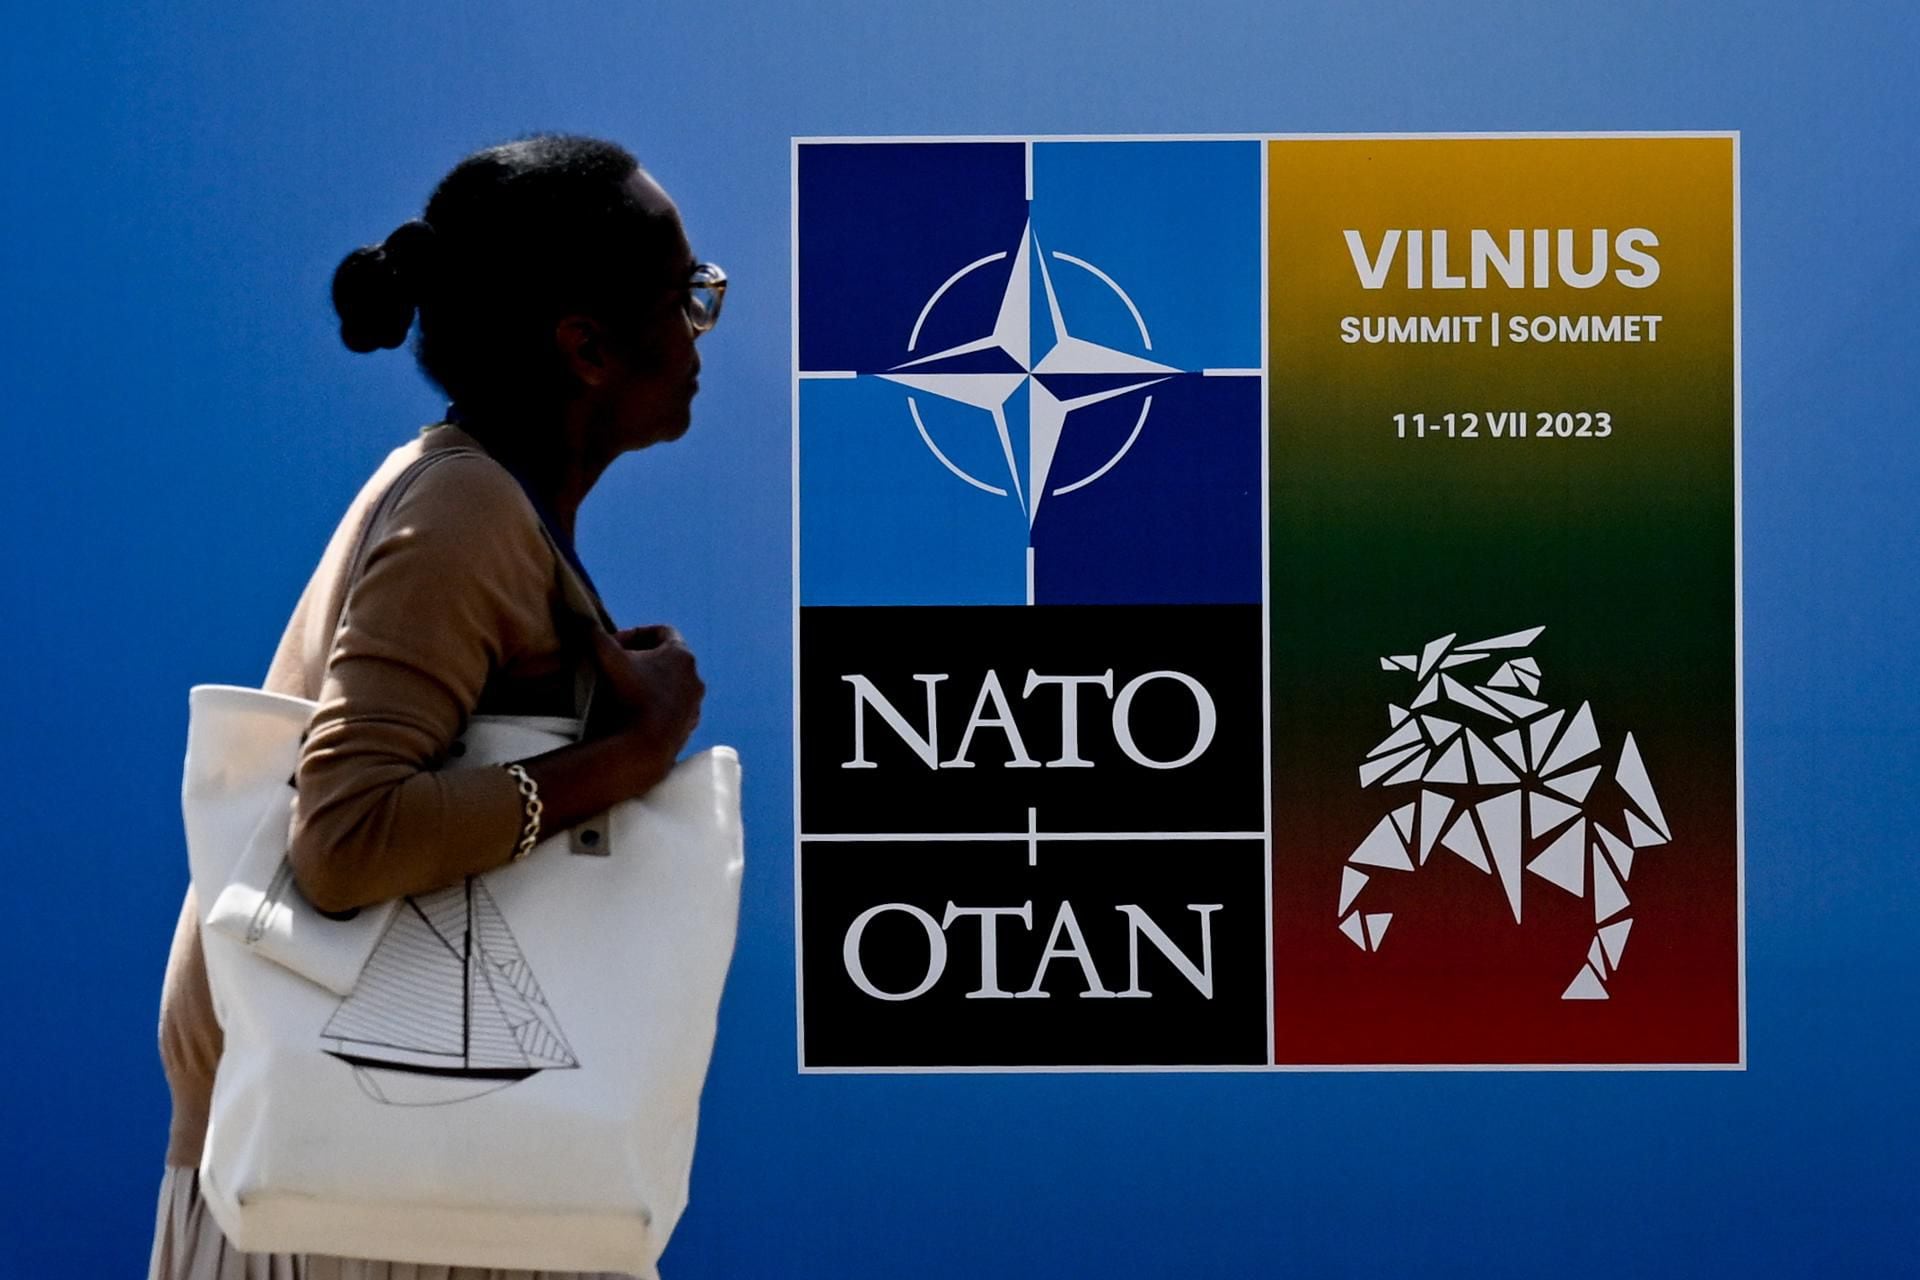 A woman walks past a NATO poster at the NATO summit venue in Vilnius, Lithuania, on July 9, 2023. (EFE/EPA/FILIP SINGER).